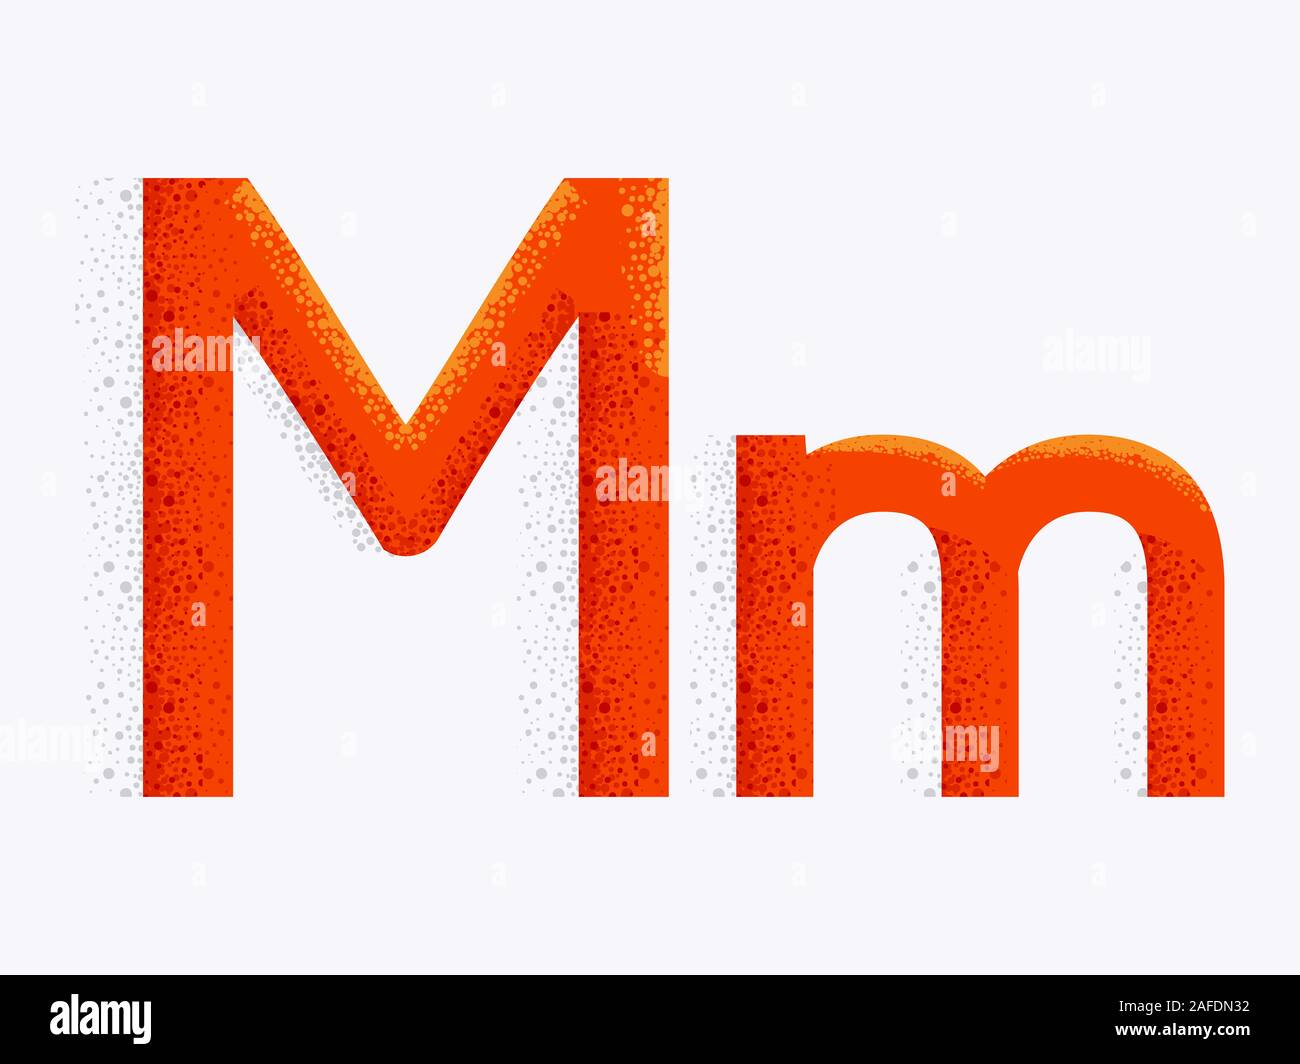 Illustration of Decorative Alphabet with Capital and Small Letter M and Dust Particle Effect Stock Photo